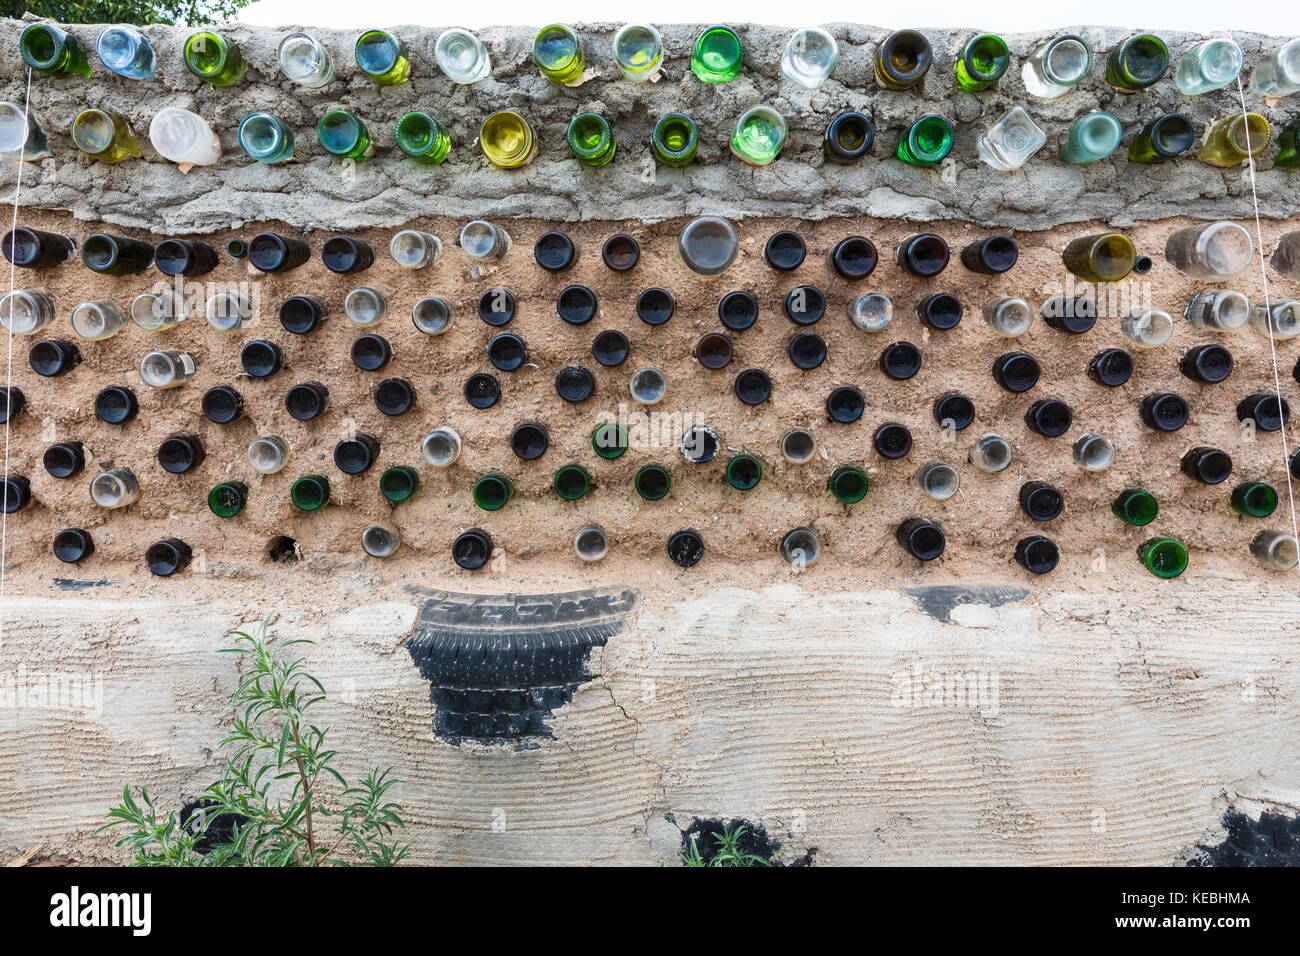 Glass bottles and recycled materials used to construct a wall, Greater World Earthship Community, Near Taos, New Mexico, USA Stock Photo